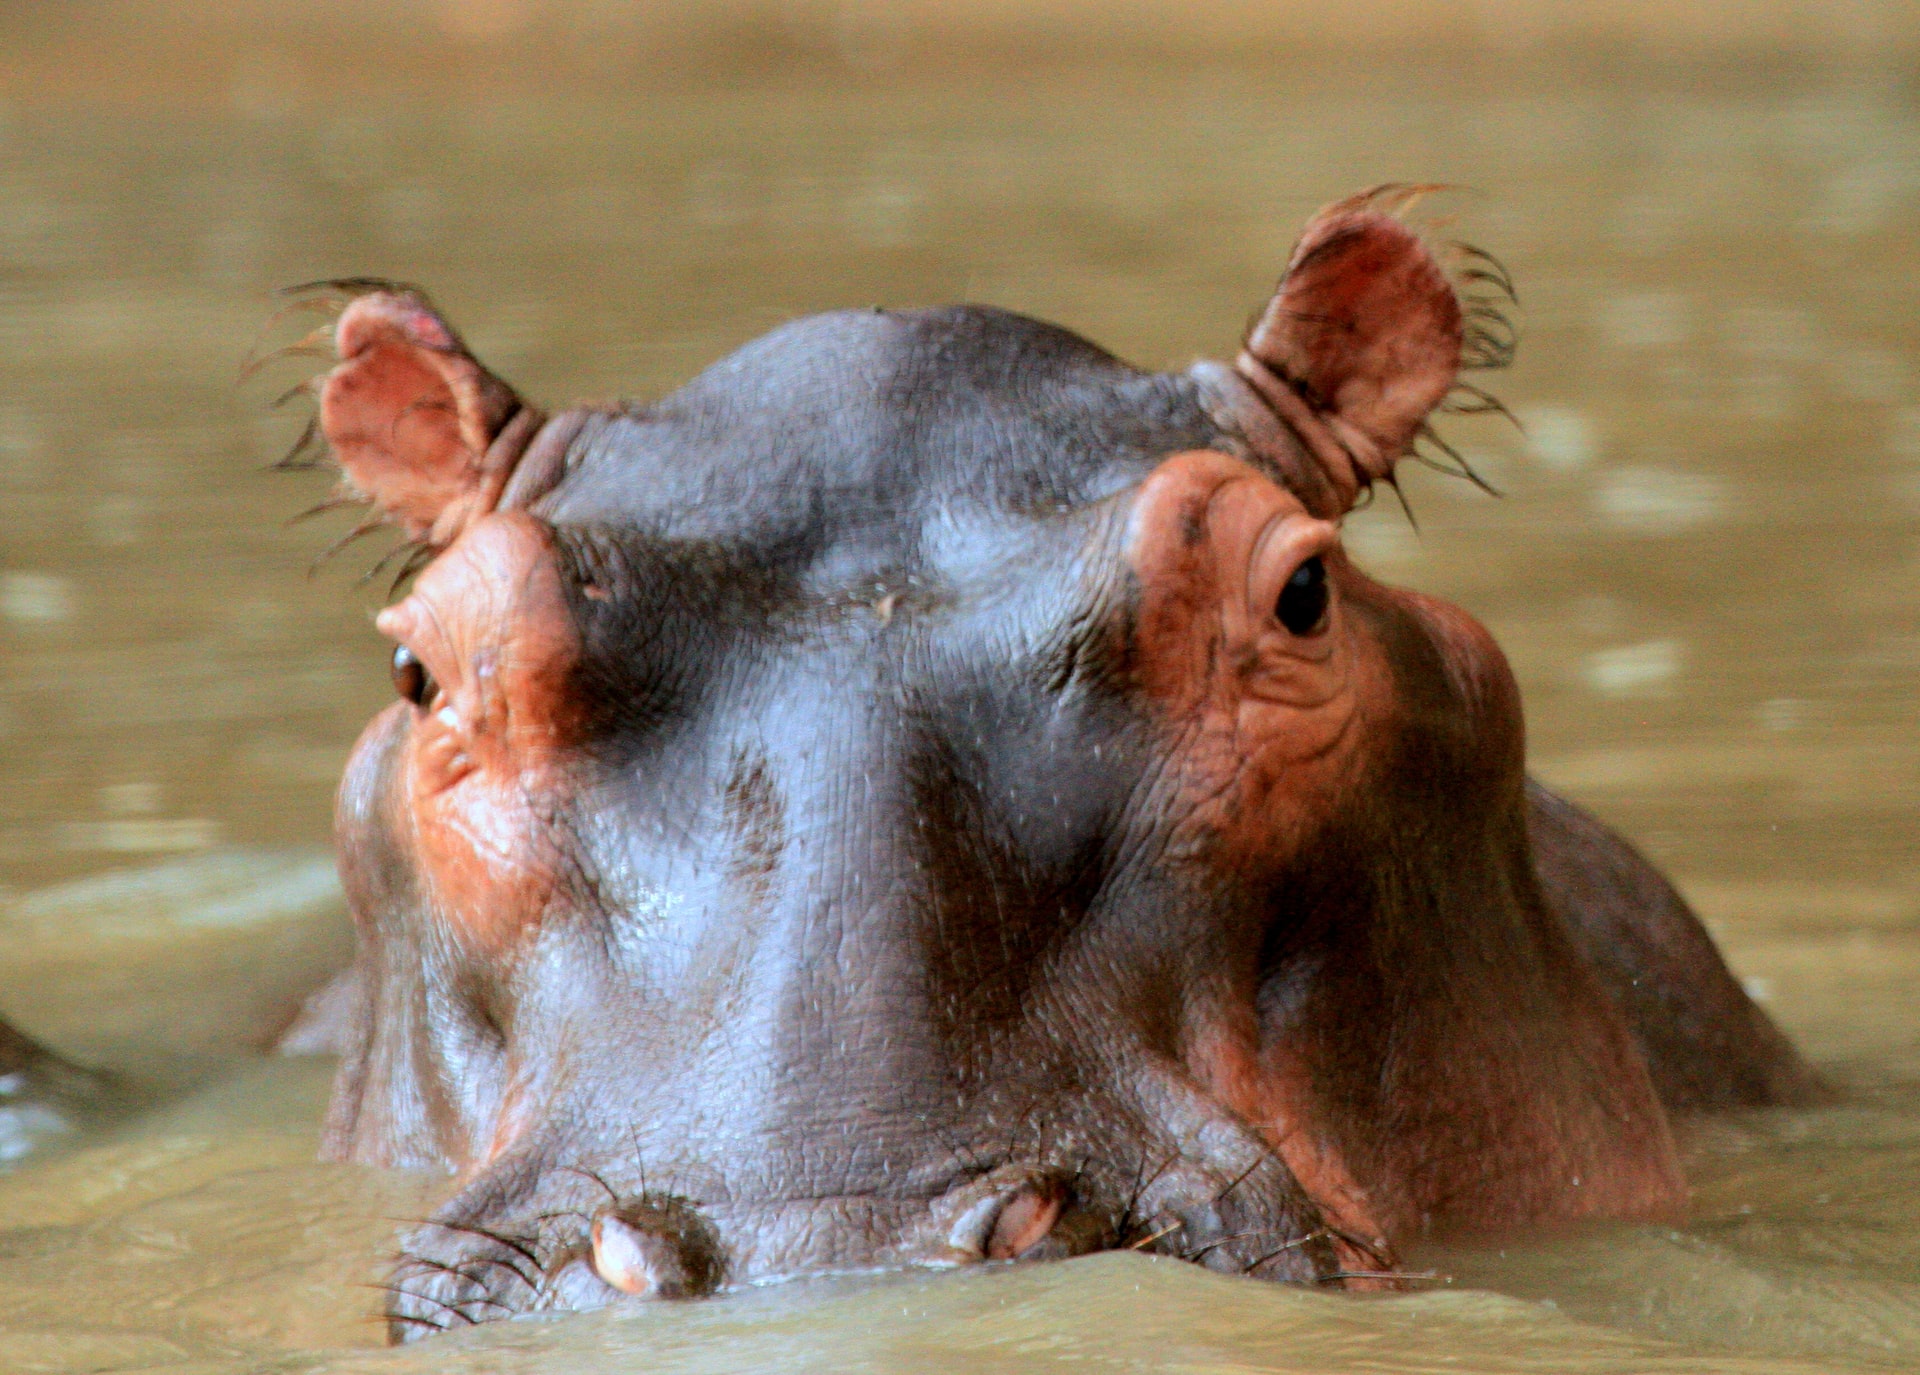 Hippo head breaking the surface of the water